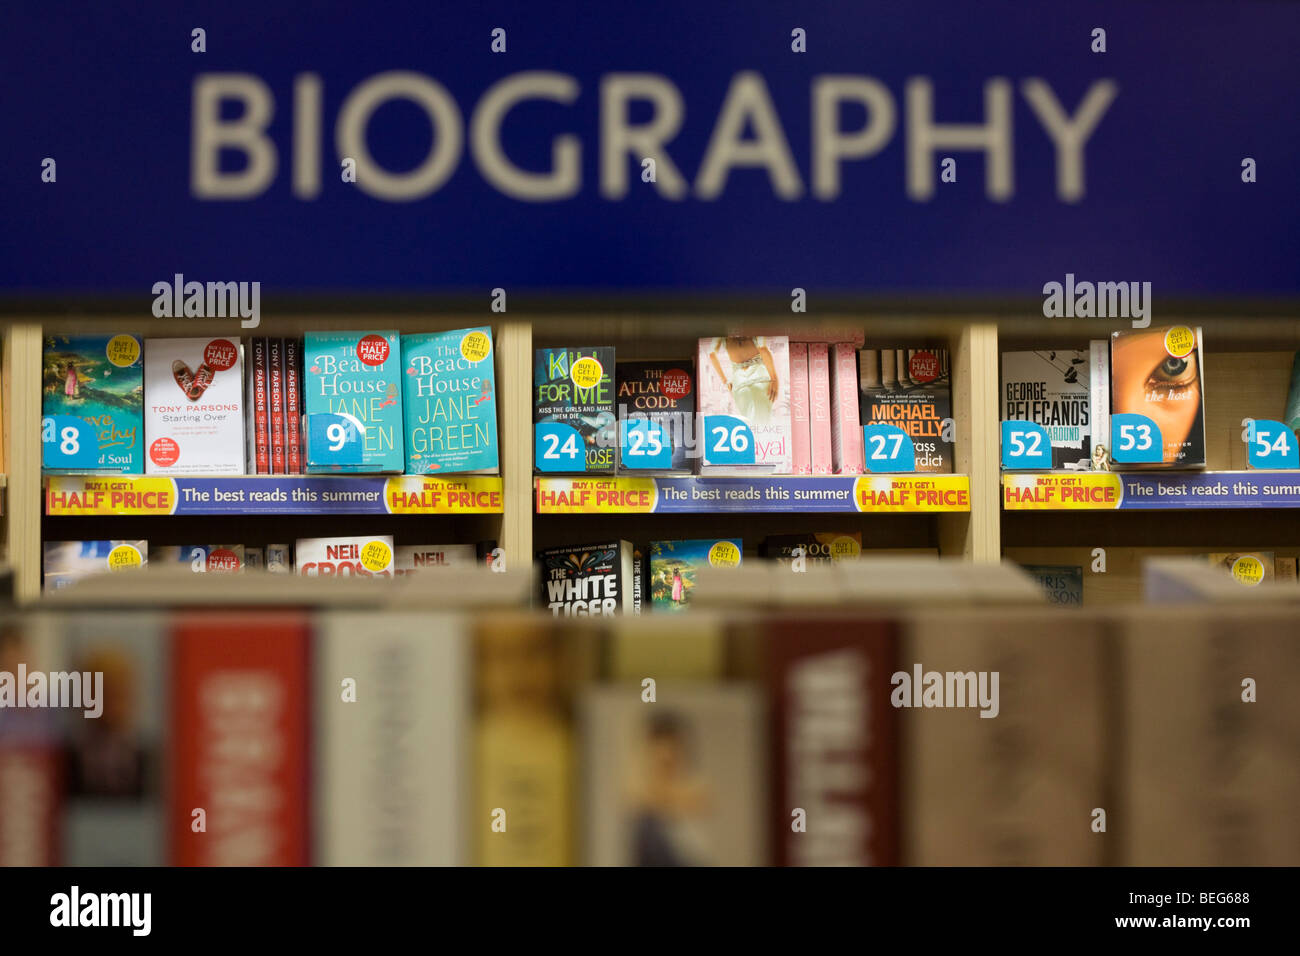 WH Smiths biographical literature on sale in departures shopping area of Heathrow airport's Terminal 5. Stock Photo